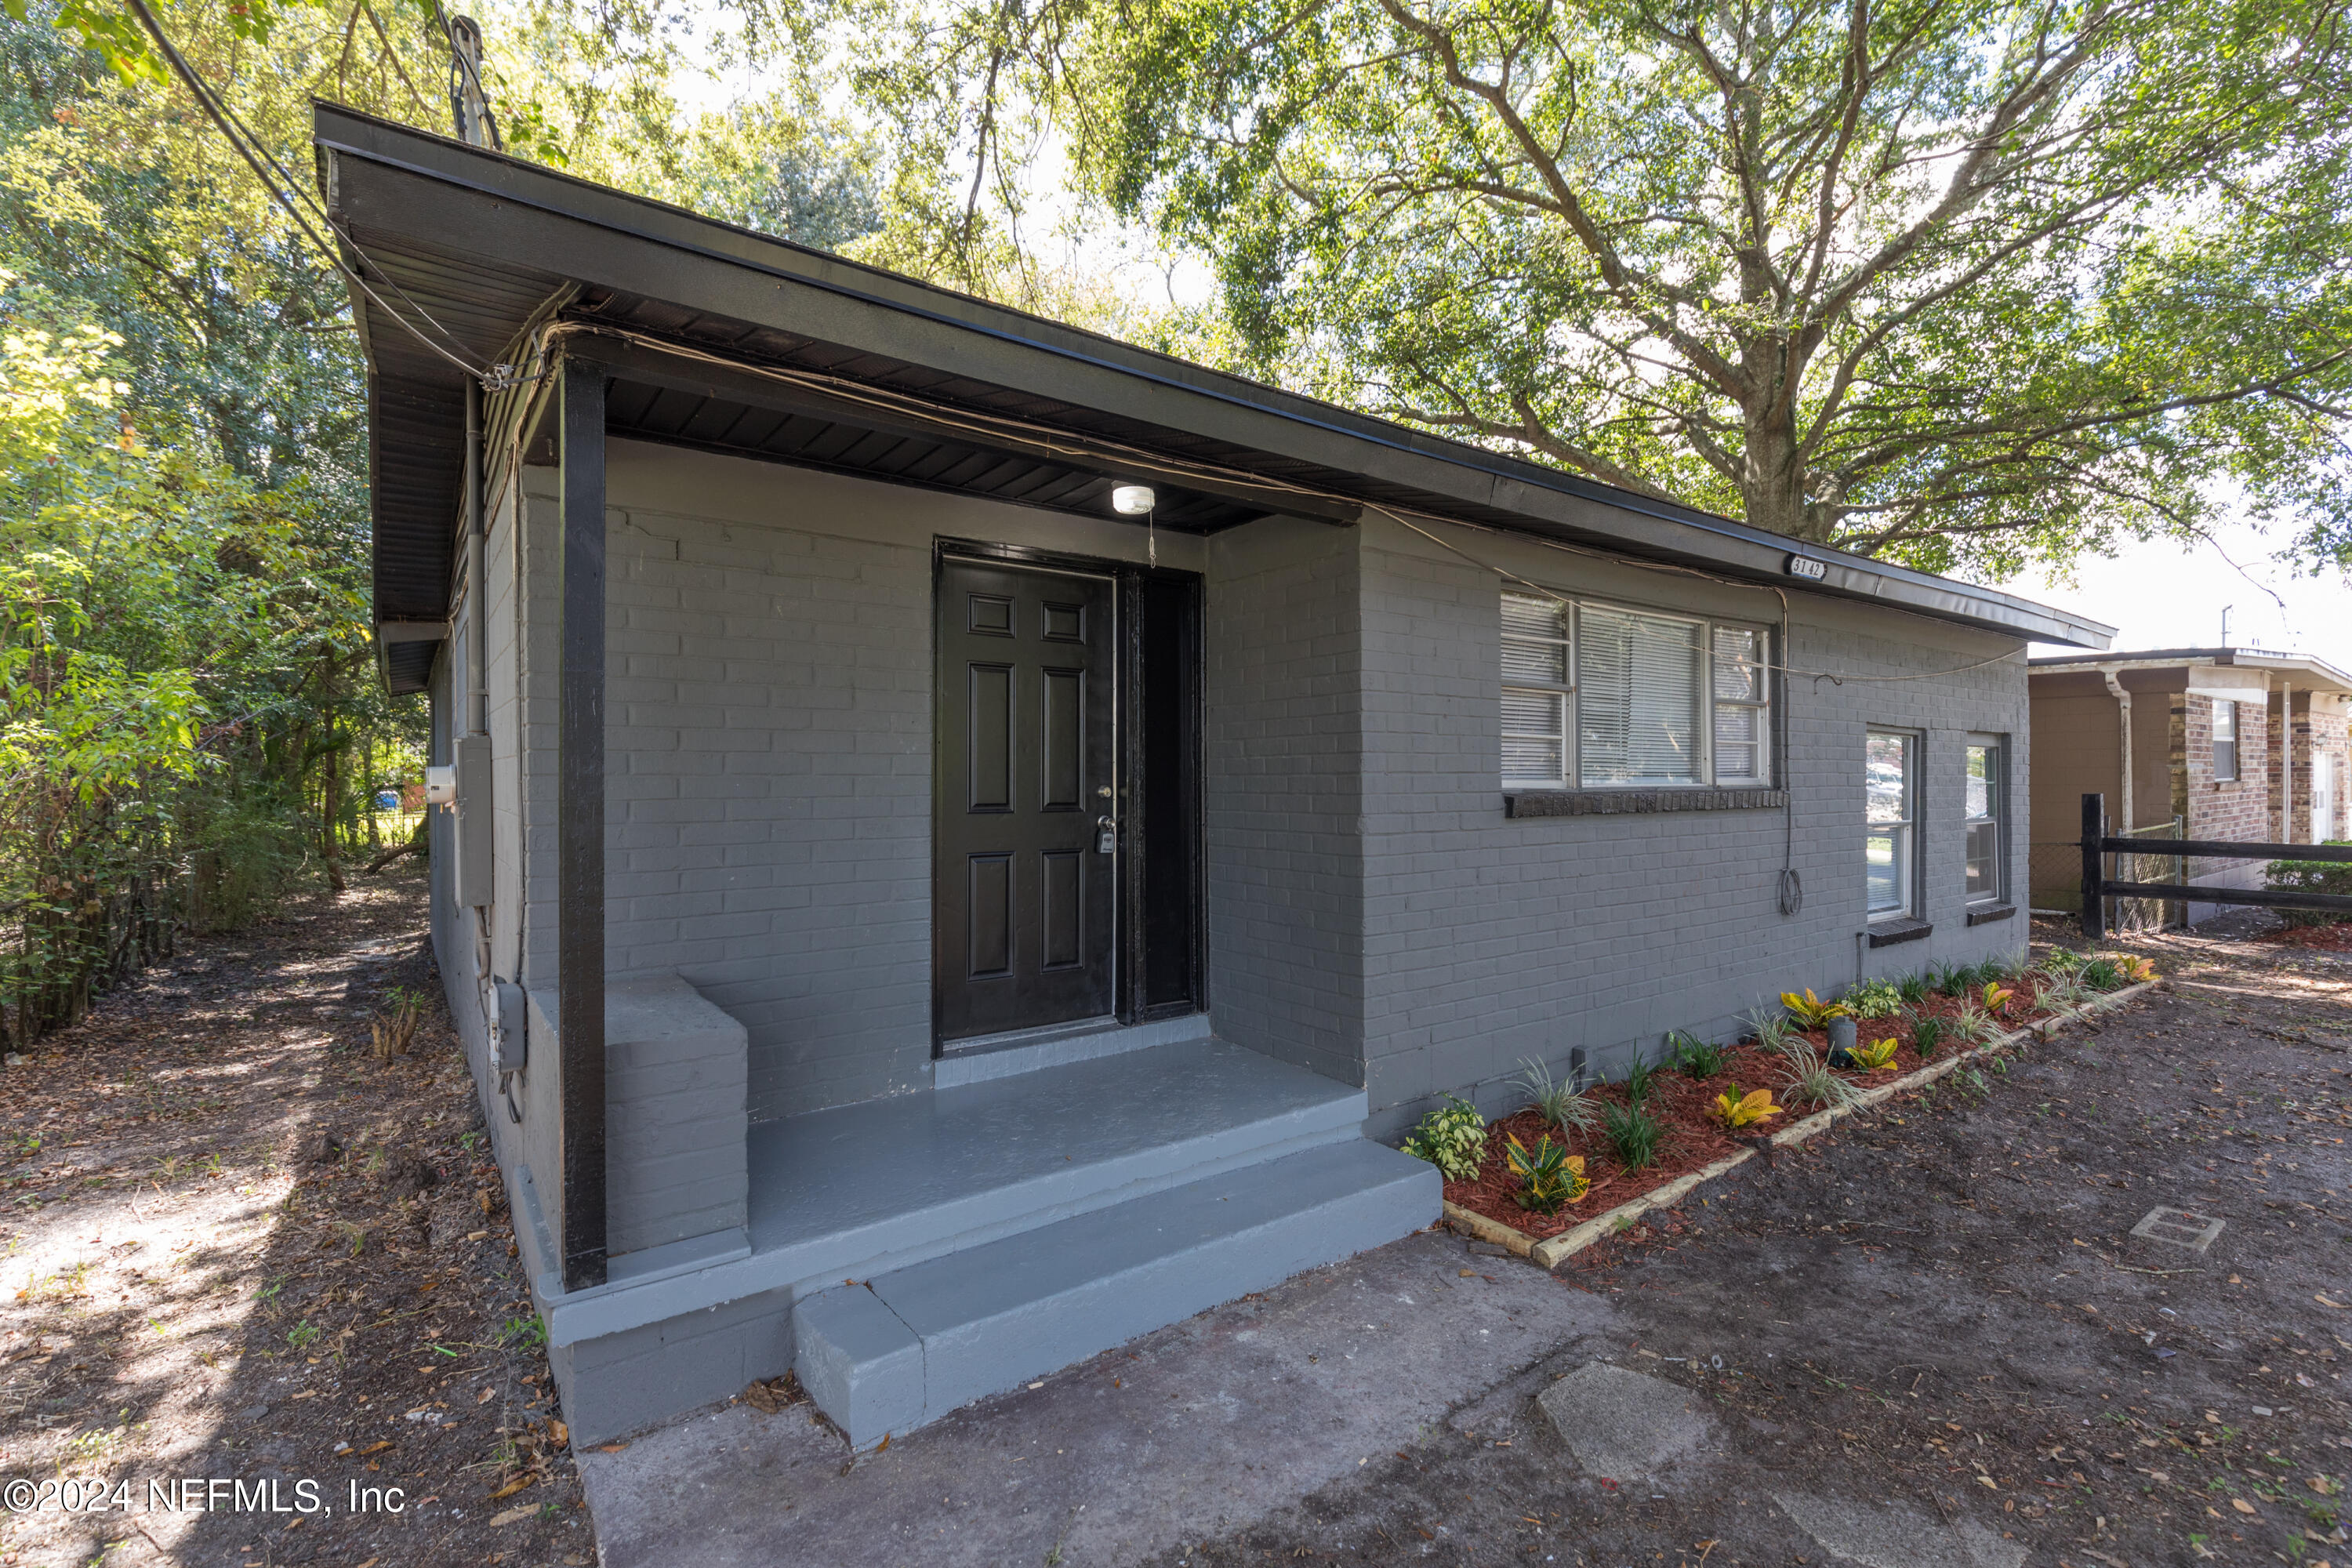 Jacksonville, FL home for sale located at 3142 W 6th Street, Jacksonville, FL 32254